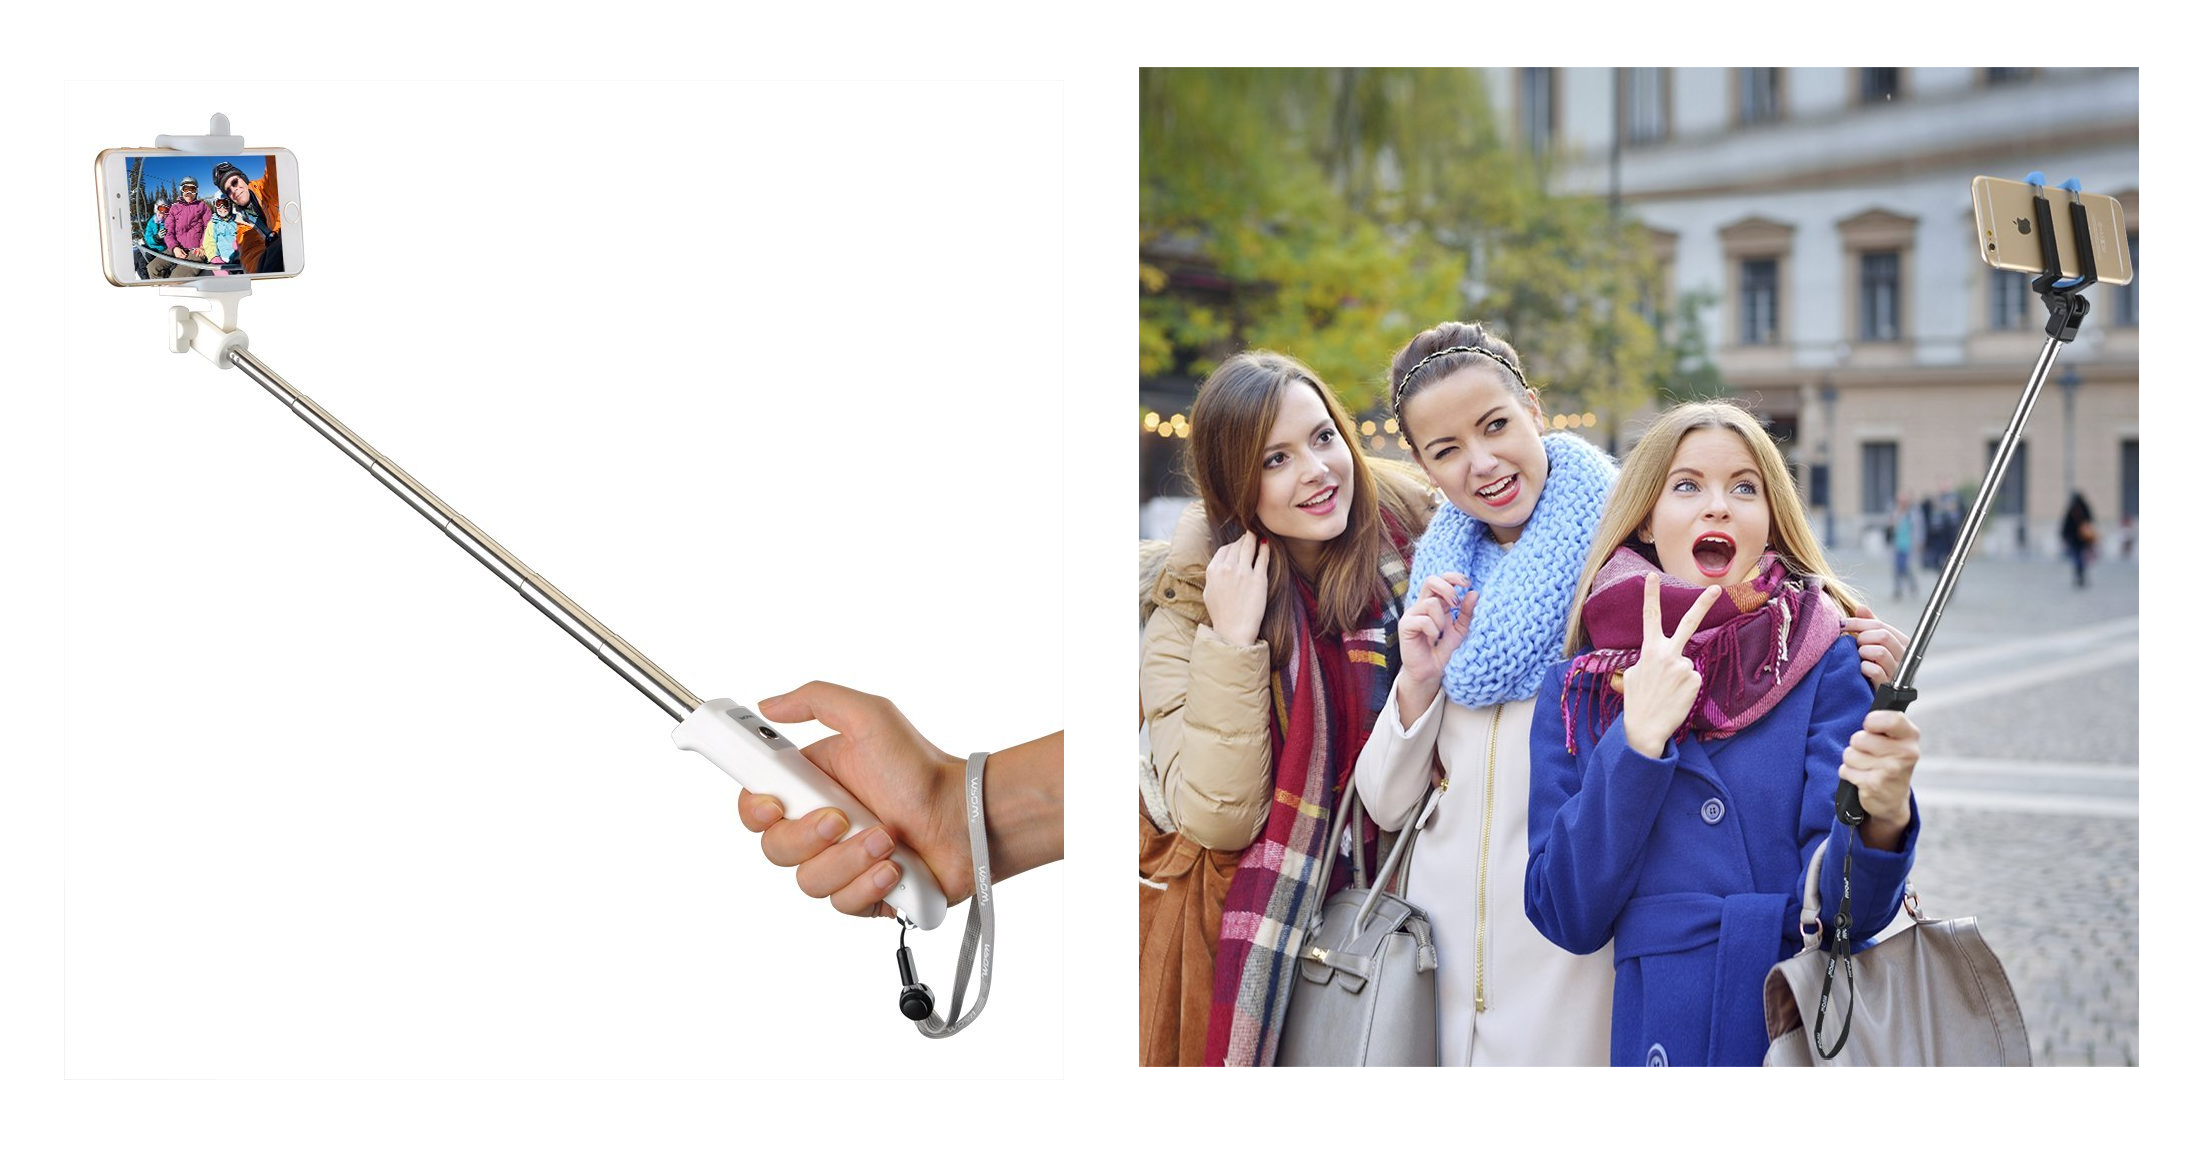 Extendable Bluetooth Selfie Stick With Built-in Remote Shutter Only $4.99! (Great Stocking Stuffer!)